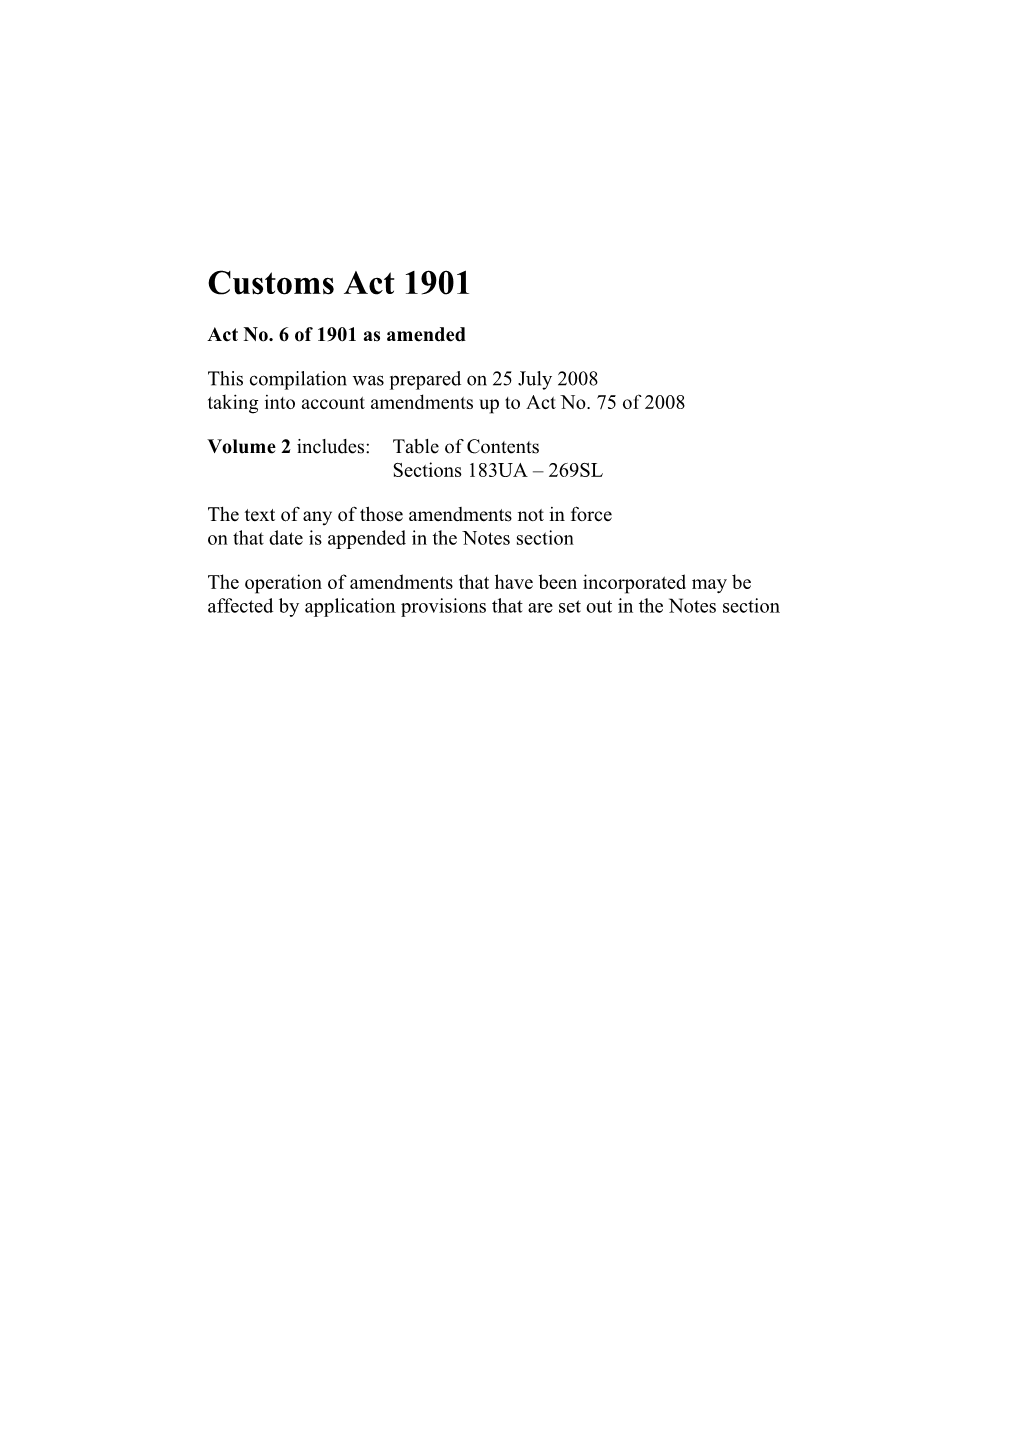 Act No.6 of 1901 As Amended